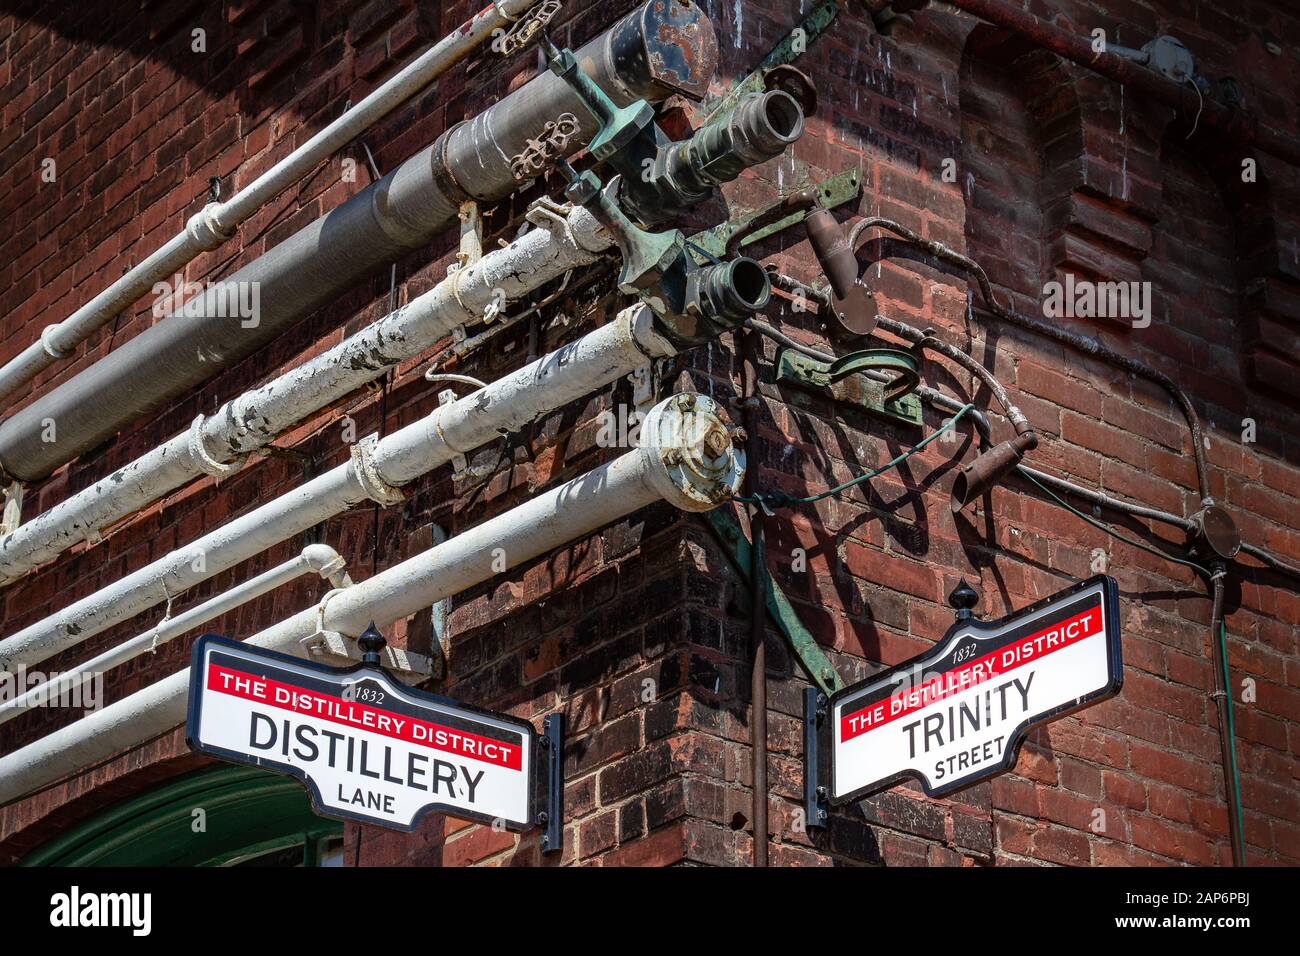 Vintage street signs against a red brick wall with industrial pipes Stock Photo